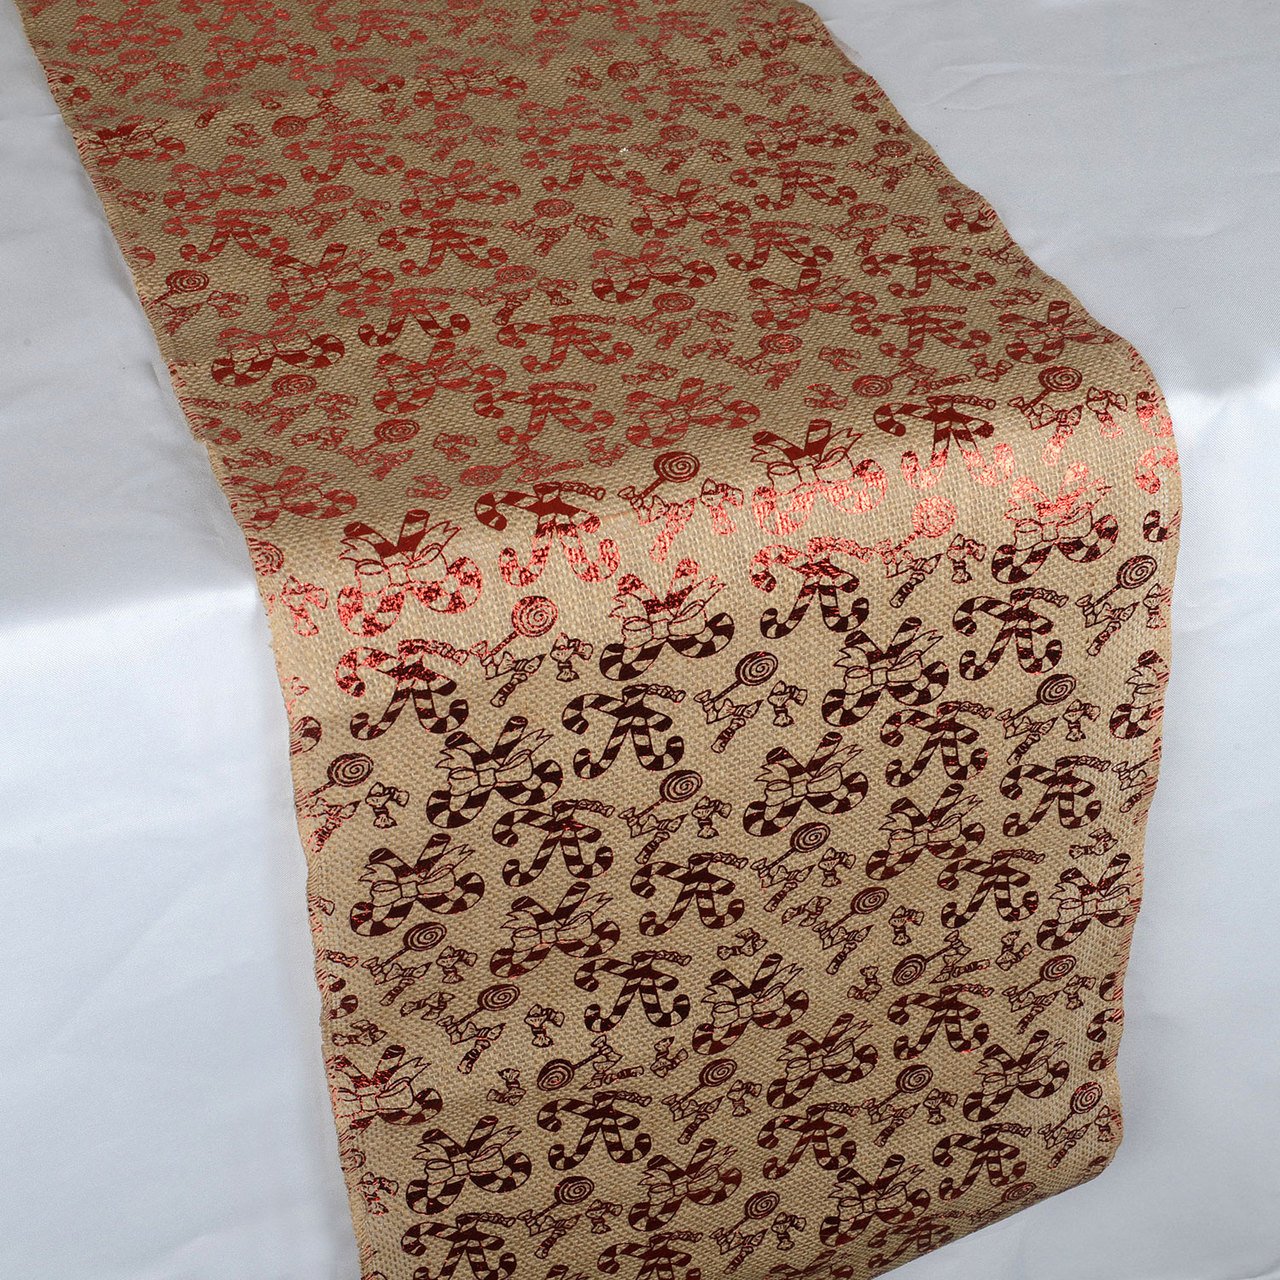 Candy Cane Natural - 100% Natural Jute Burlap Table Runner ( 14 inch x 108 inches )